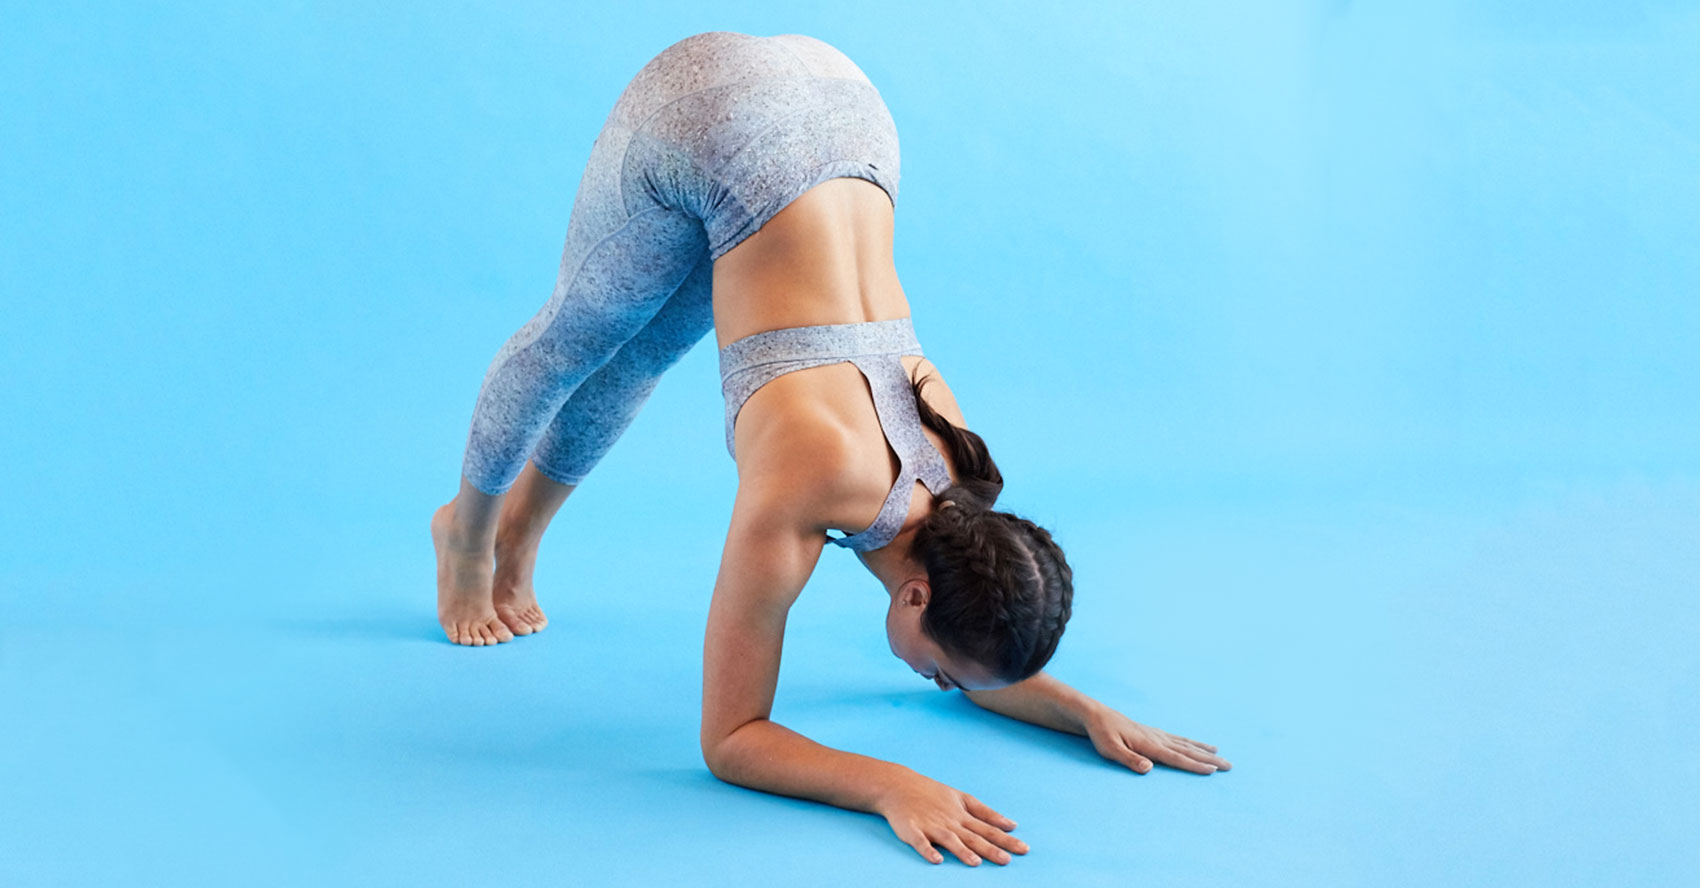 dolphin pose to headstand